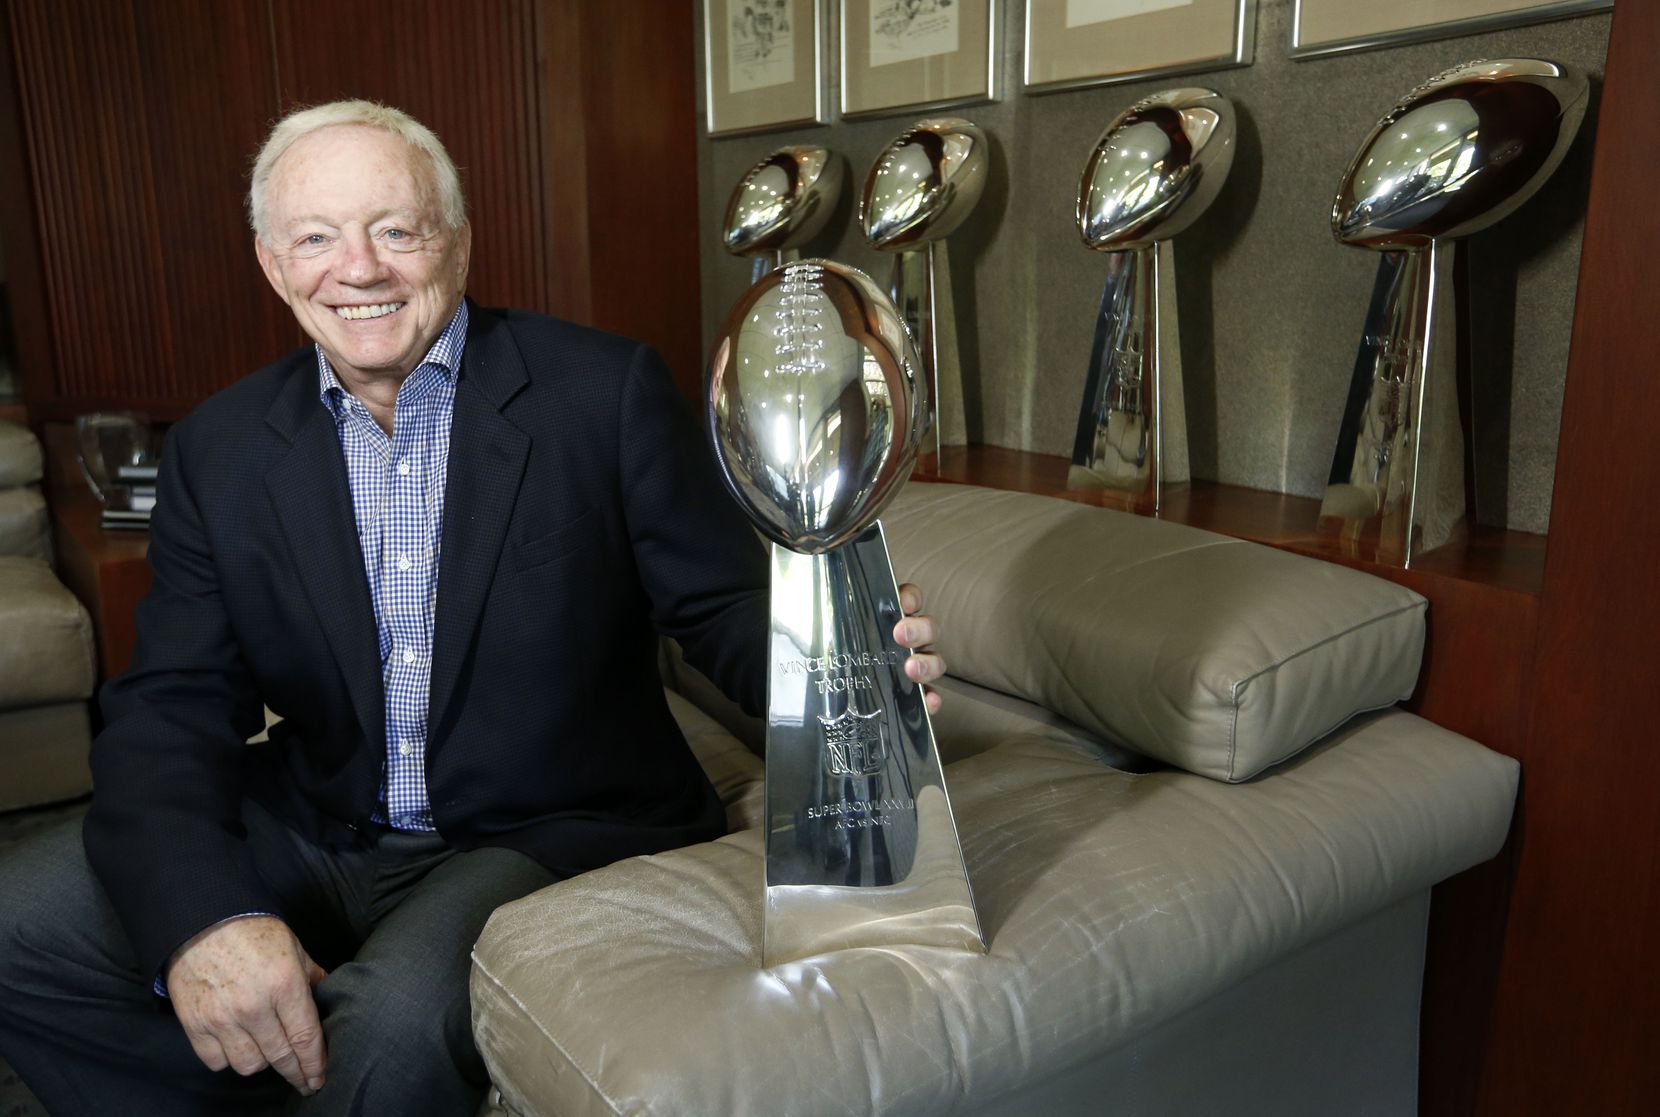 The Cowboys have won five Super Bowl titles, including three during Jerry Jones' ownership....